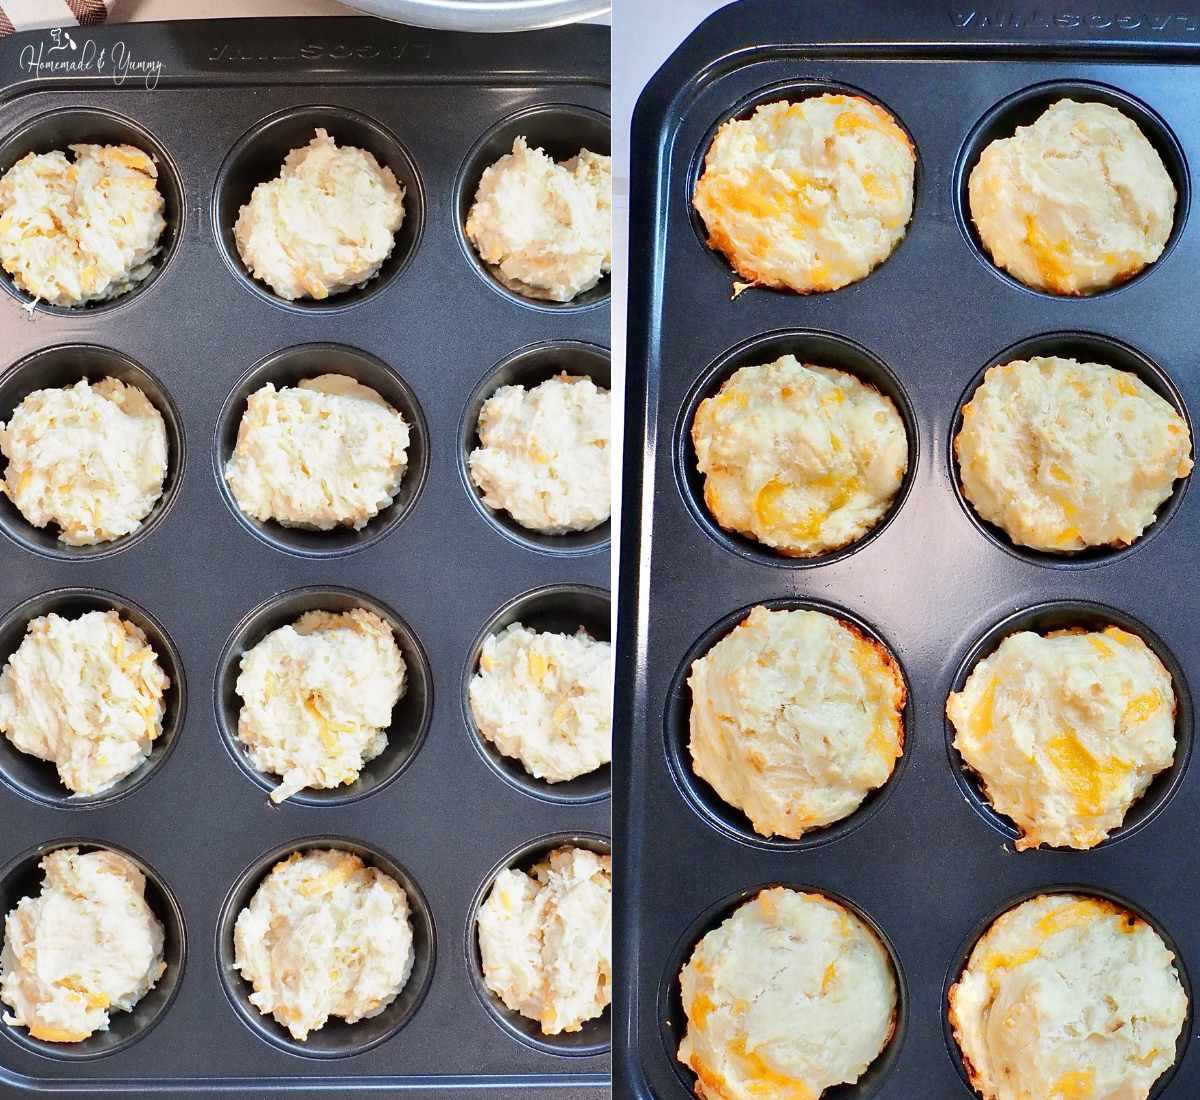 The batter in the muffin tin before and after baking.